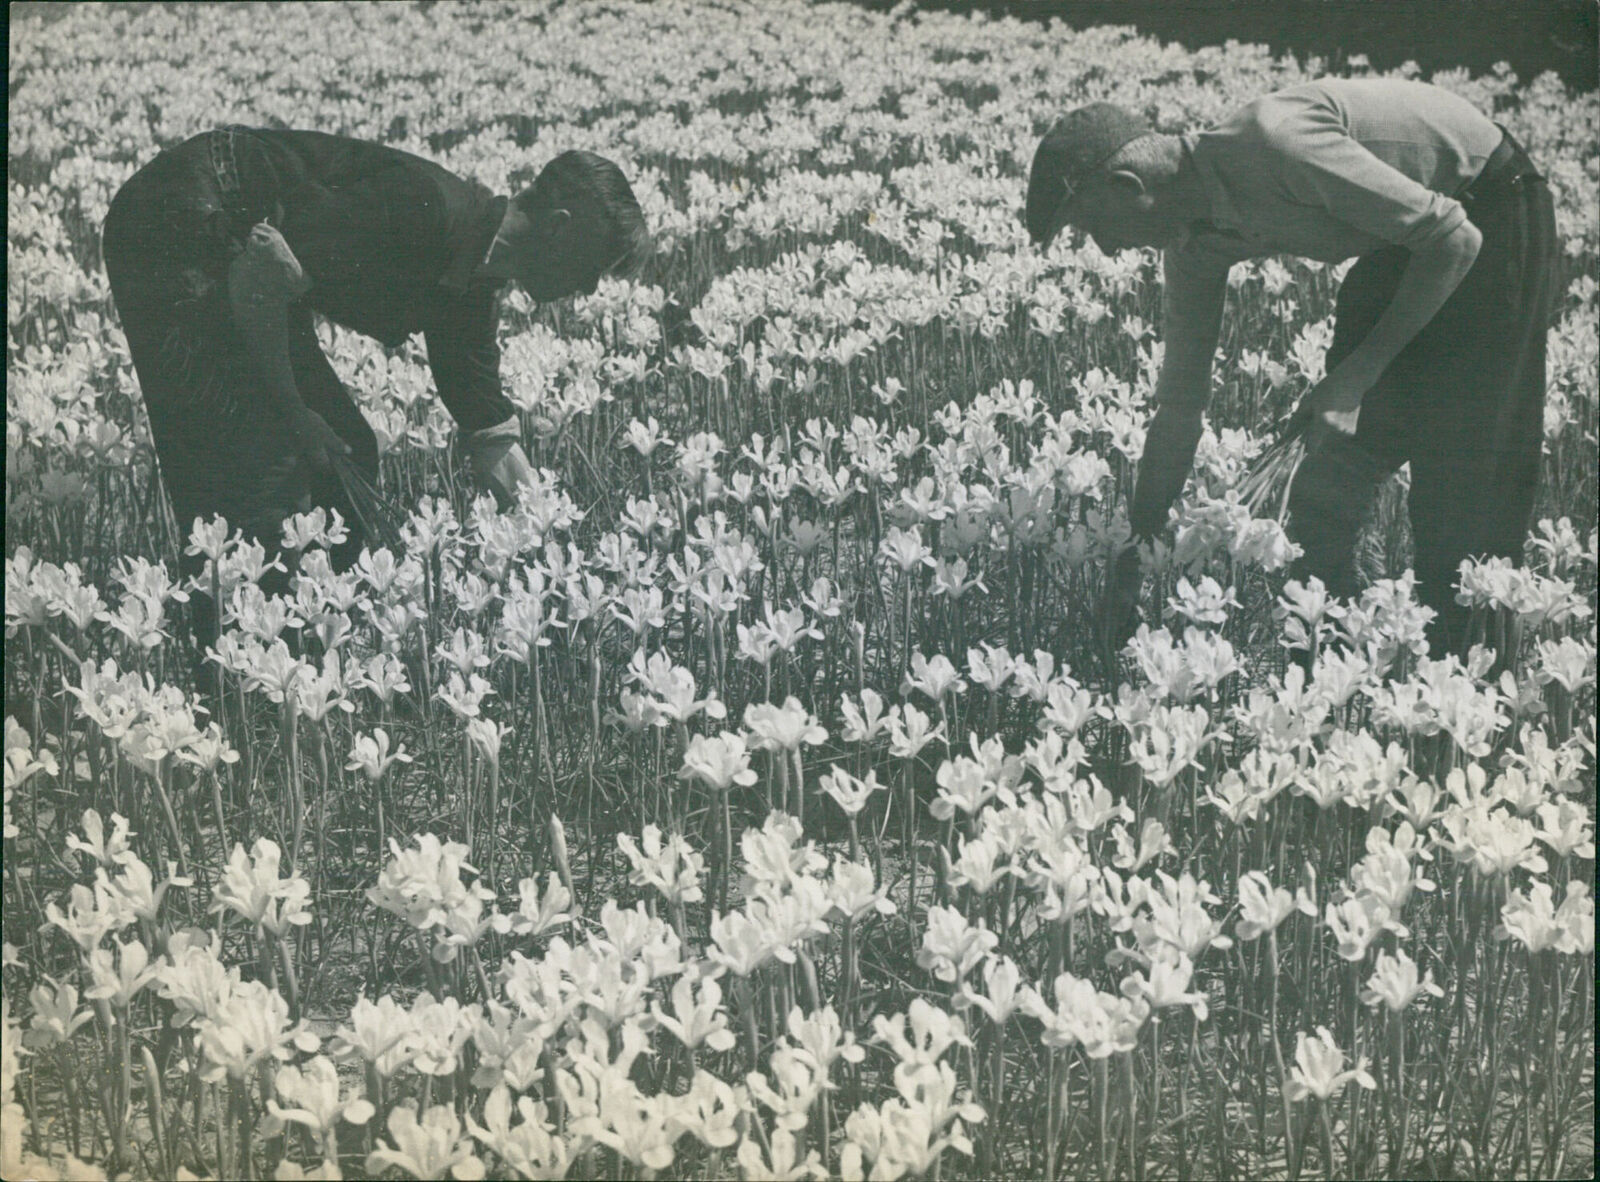 Tulip fields in the Netherlands. - Vintage Photograph 3296435